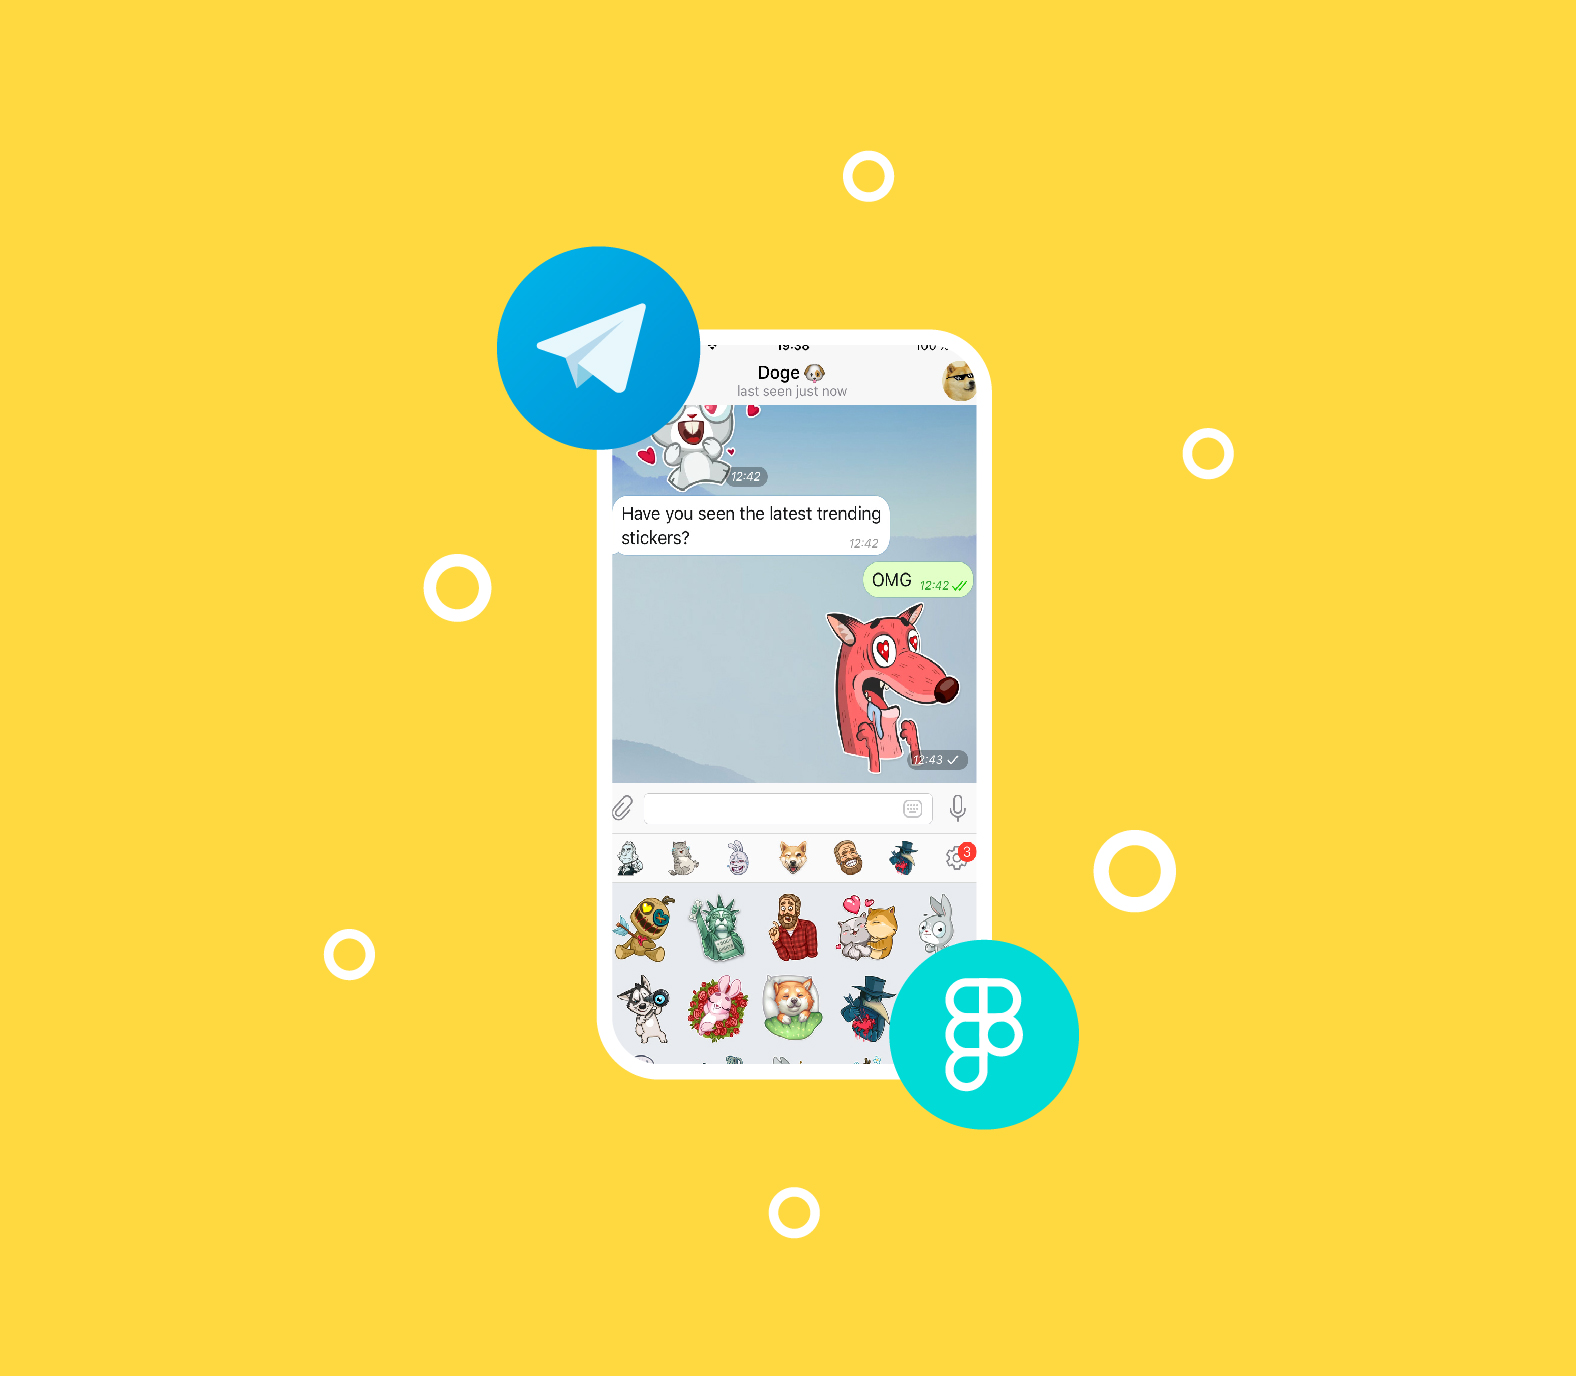 Make Conversations Fun Again By Creating Animated Telegram Stickers from Lottie Animations!